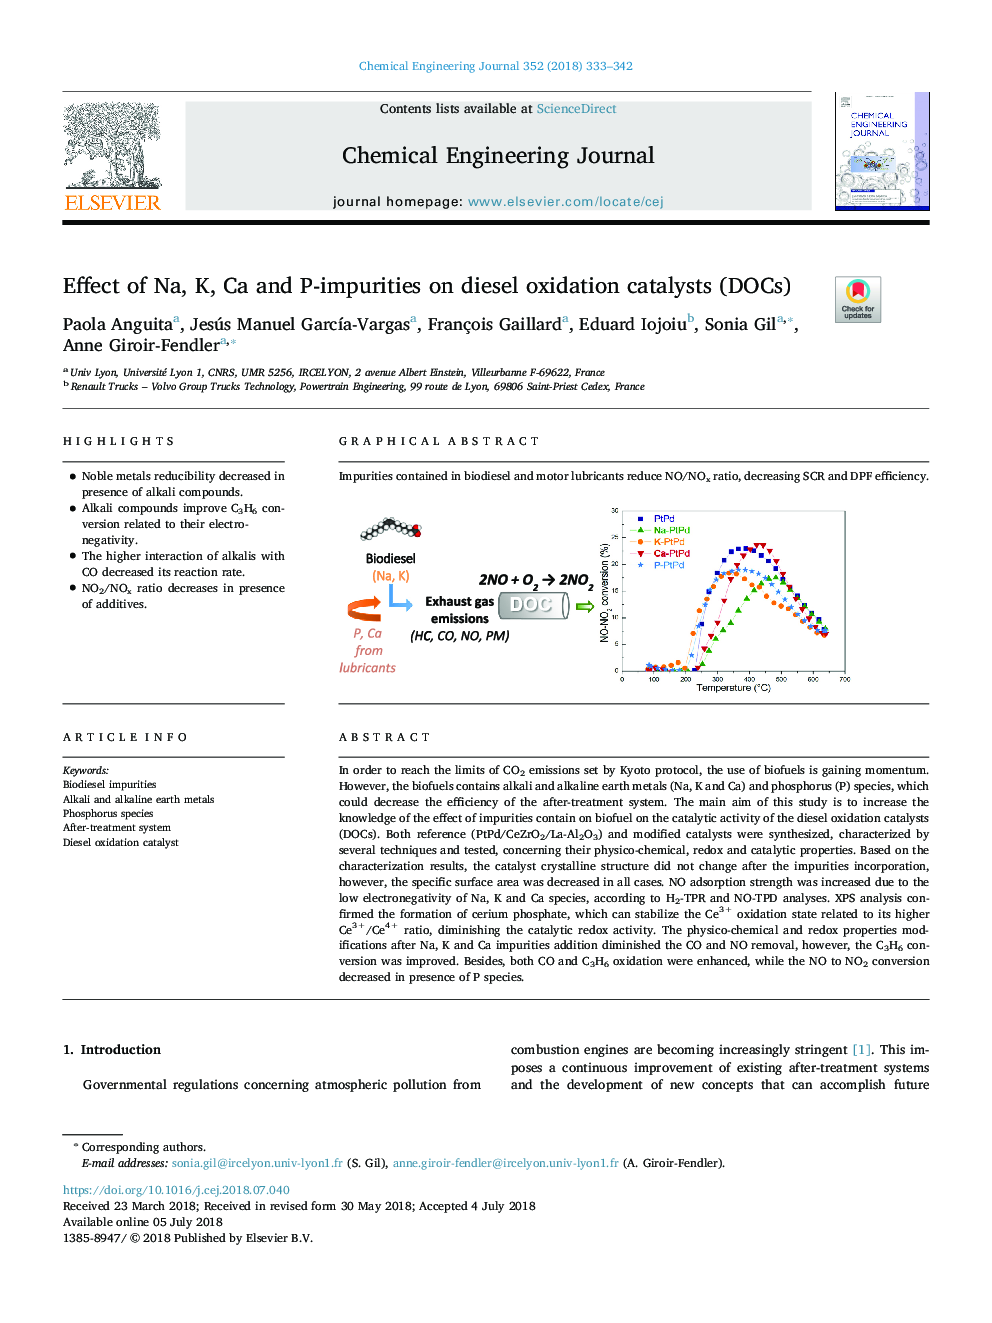 Effect of Na, K, Ca and P-impurities on diesel oxidation catalysts (DOCs)